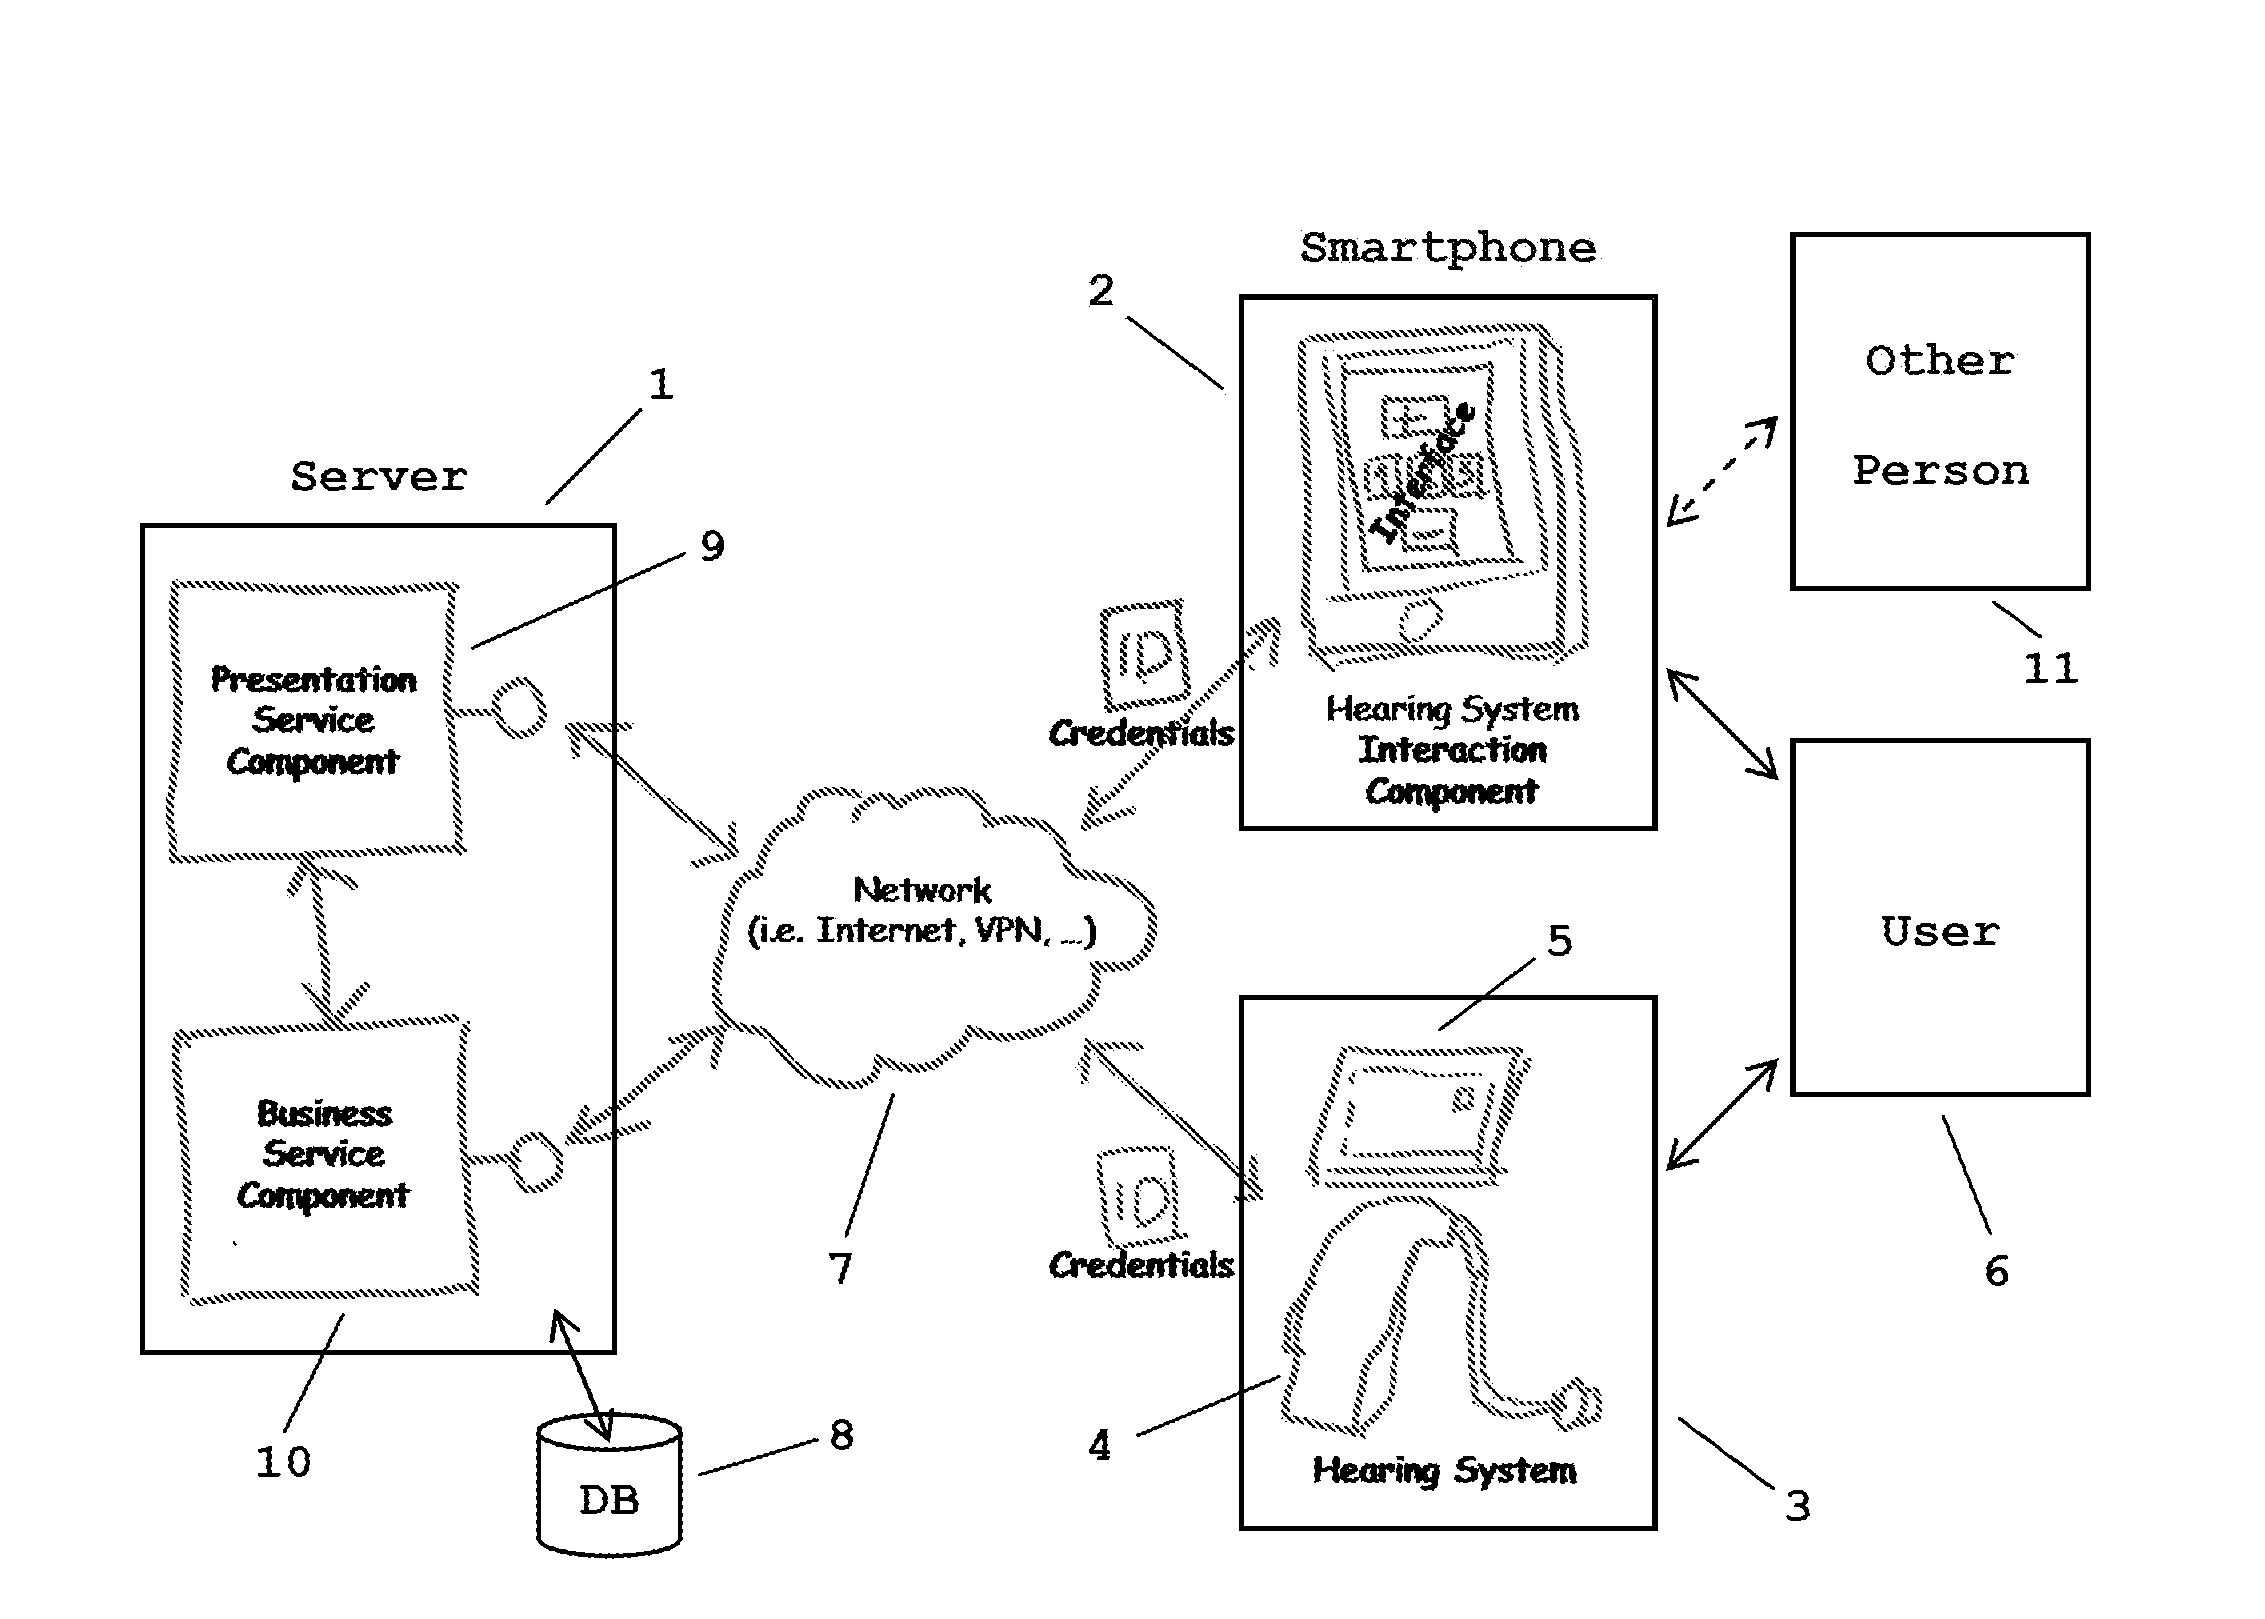 Method for controlling and/or configuring a user-specific hearing system via a communication network